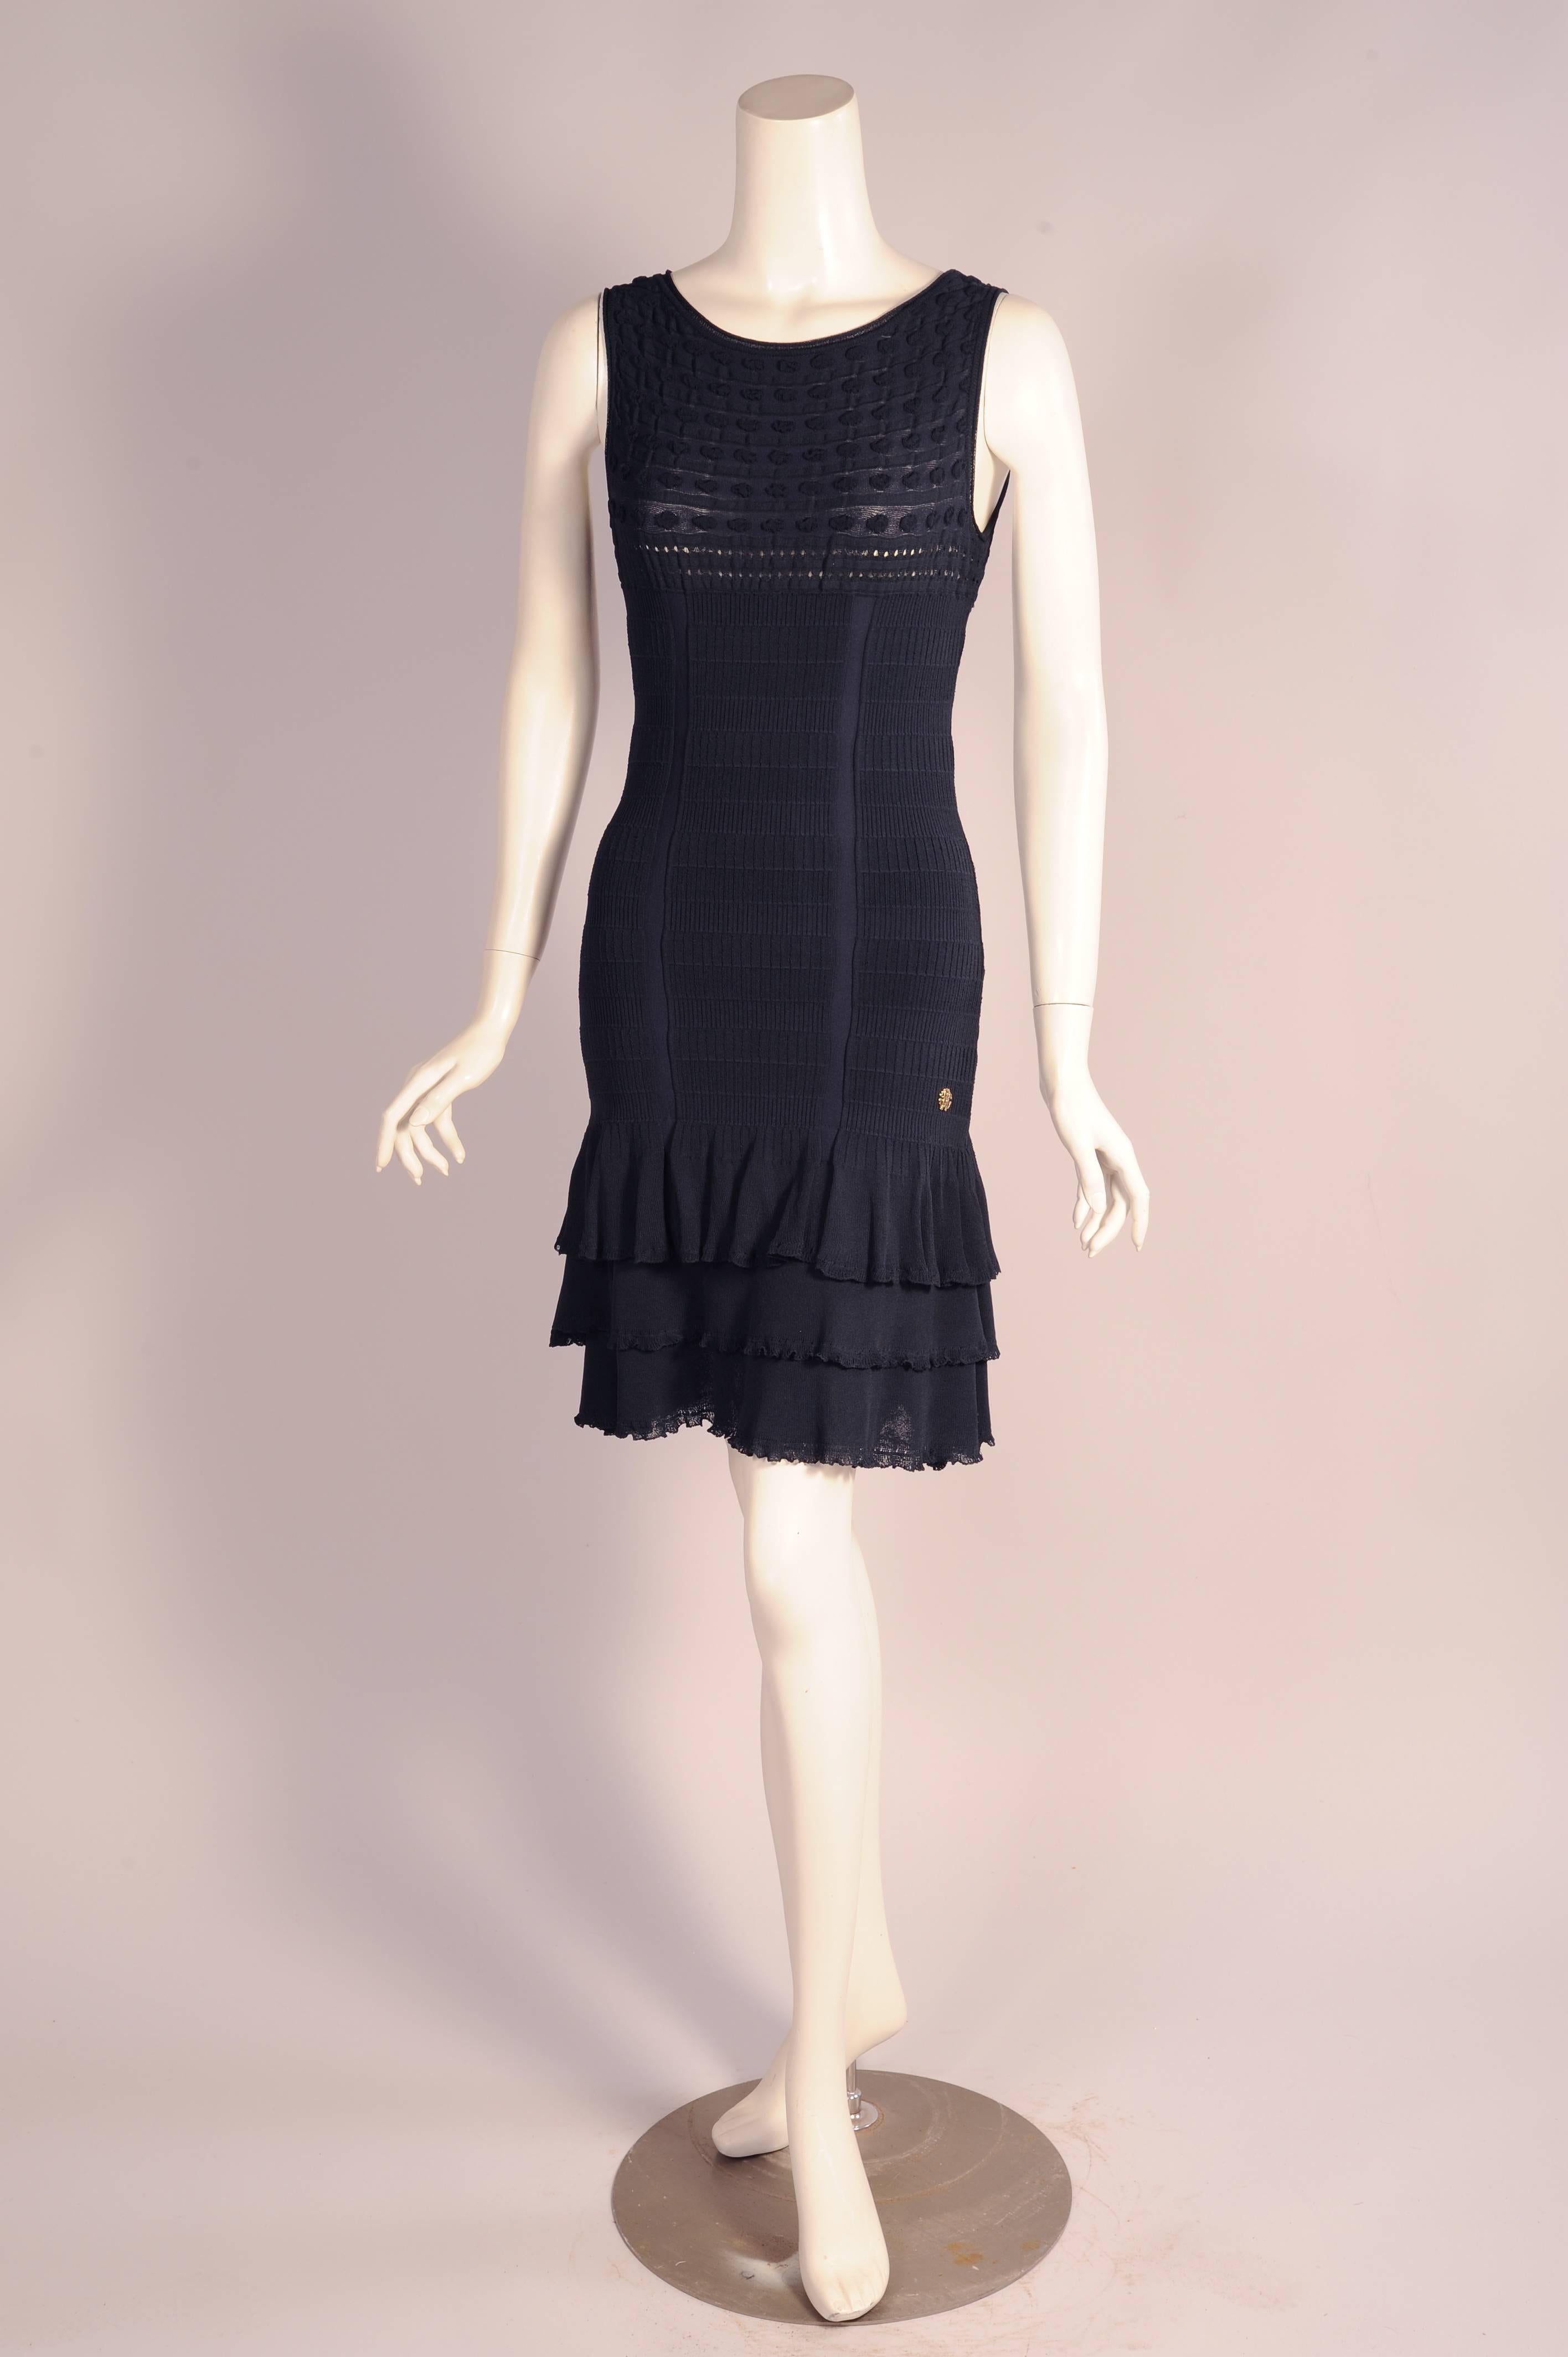 This sexy flirty little form fitting dress has several knit patterns adding extra interest. The dress has three different knit designs, one on the bodice, another vertical one on the torso and the ruffled hem. It has a Robrto Cavalli logo pin just